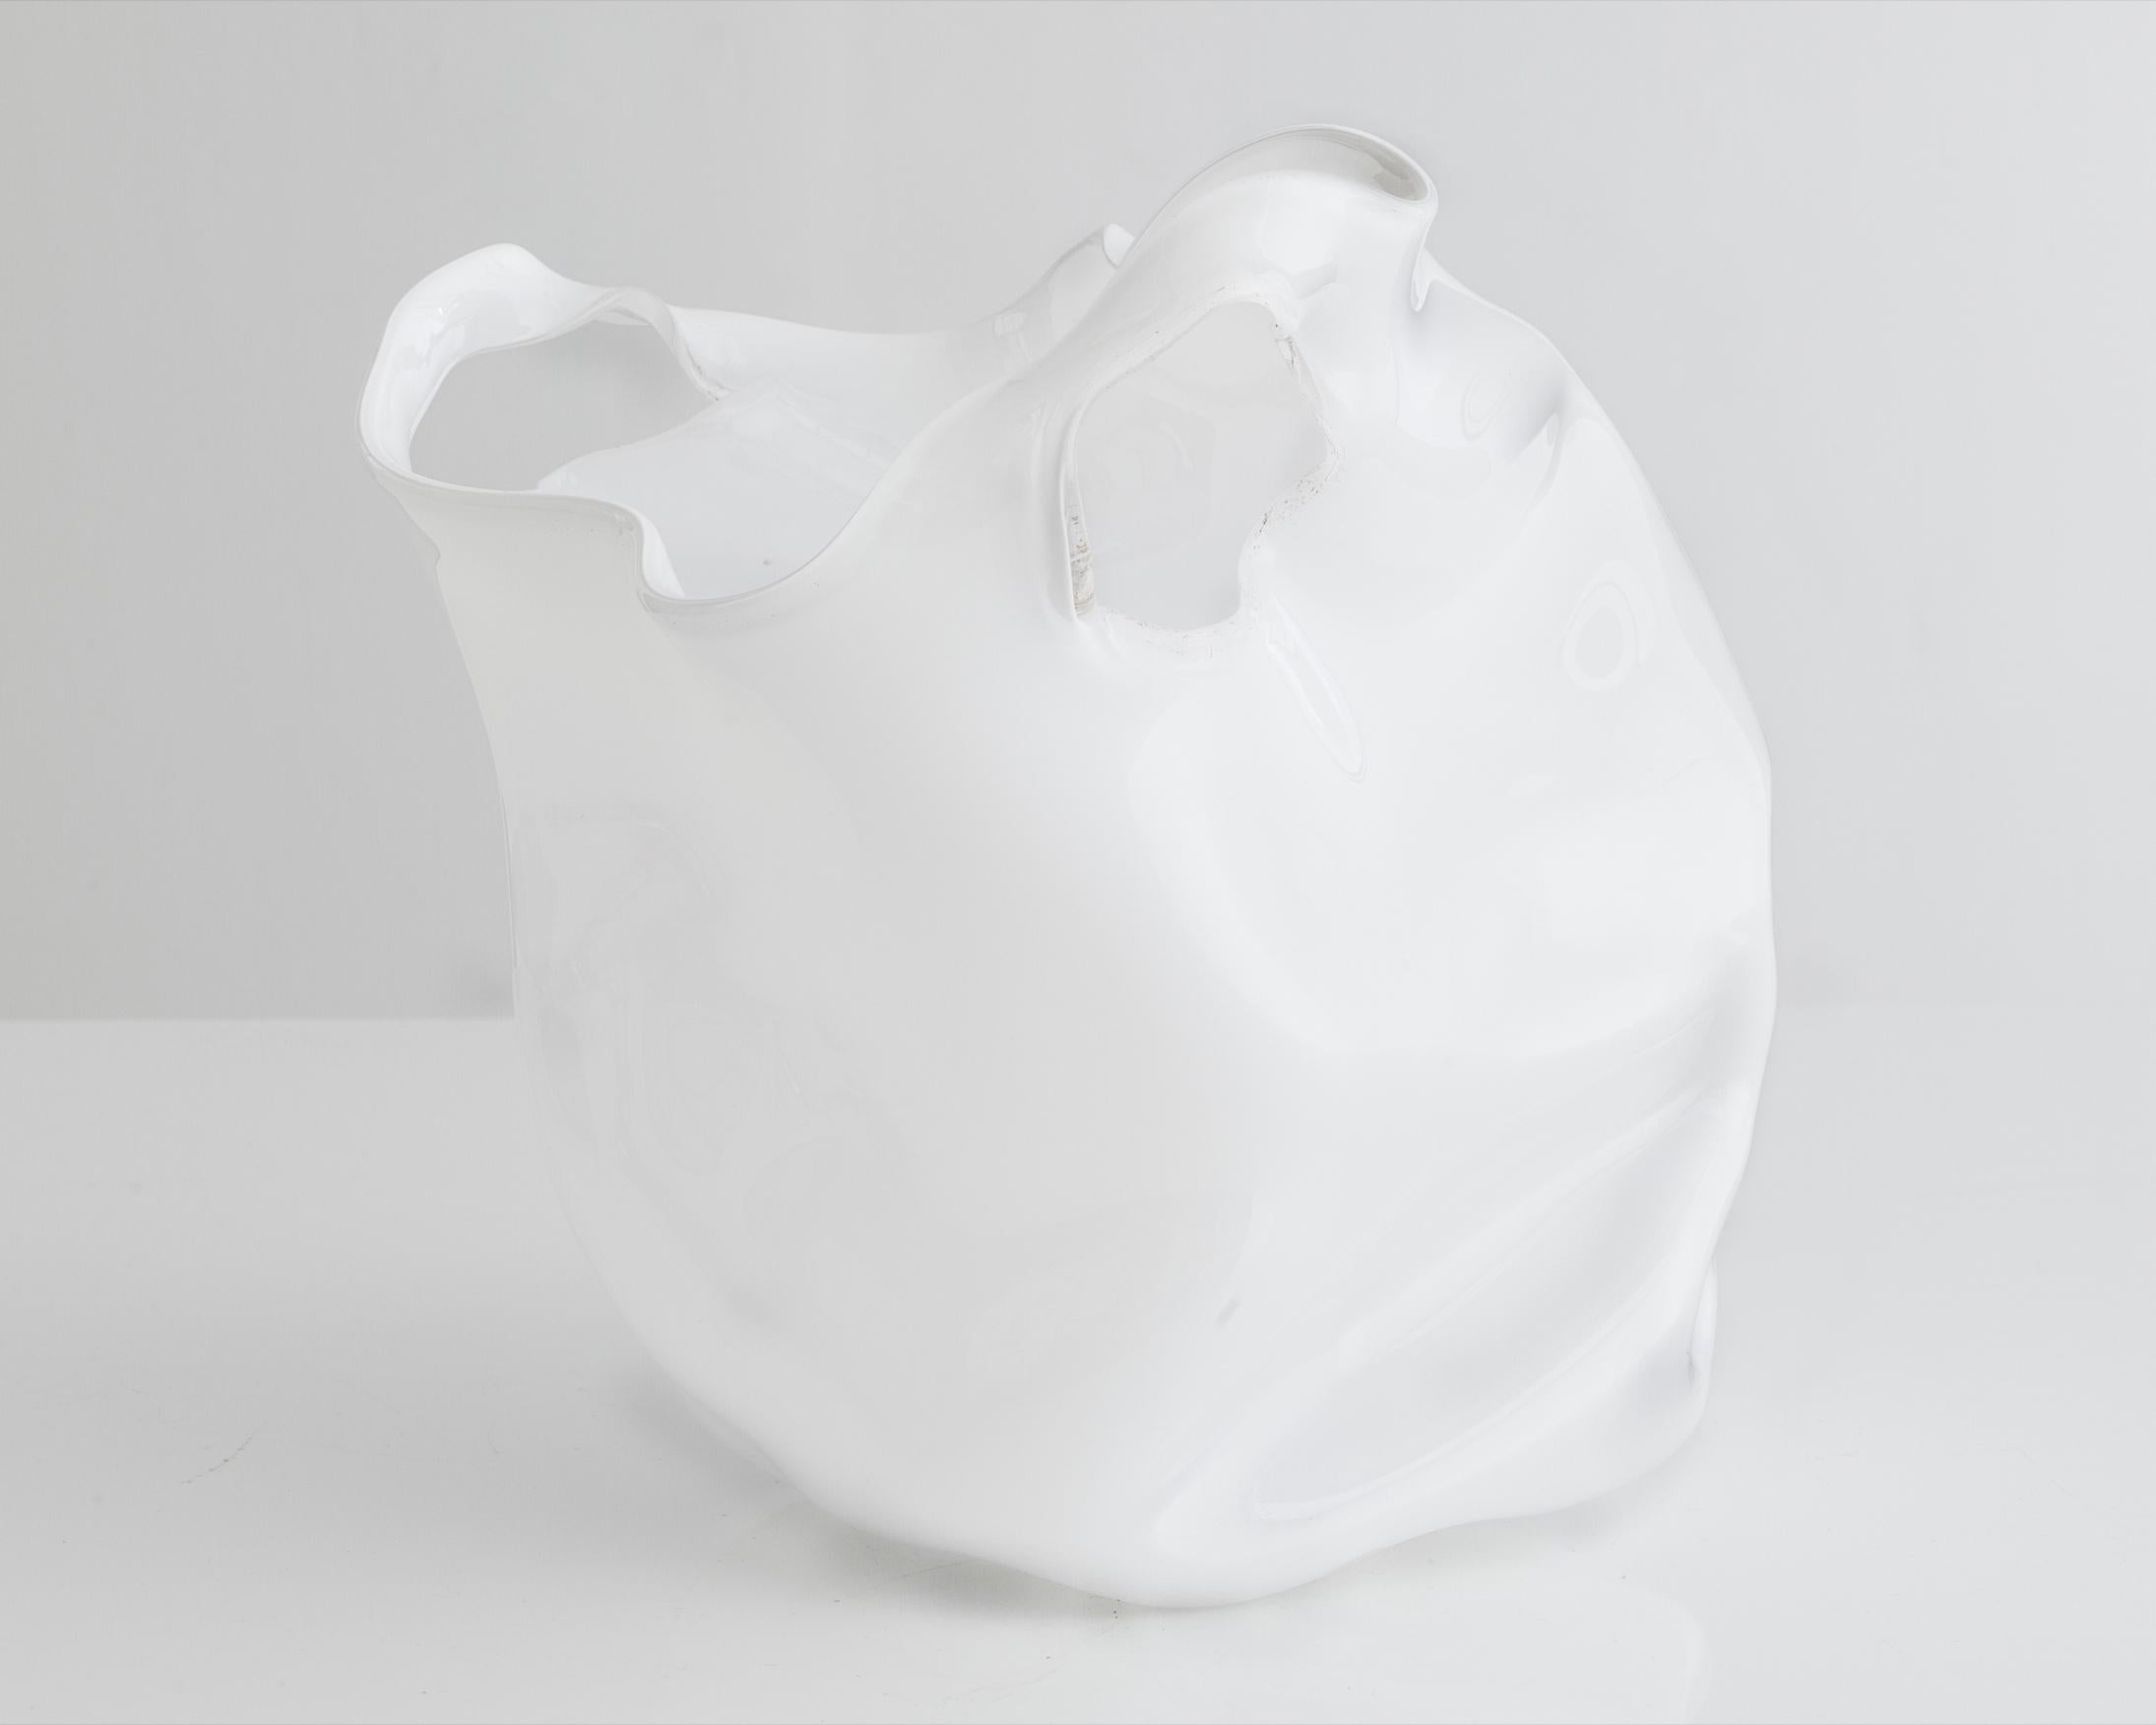 Unique crumpled sculptural vessel in white hand blown glass. Designed and made by Jeff Zimmerman, USA, 2014.

Limited number available. Please note that each item may differ slightly in color and shape.